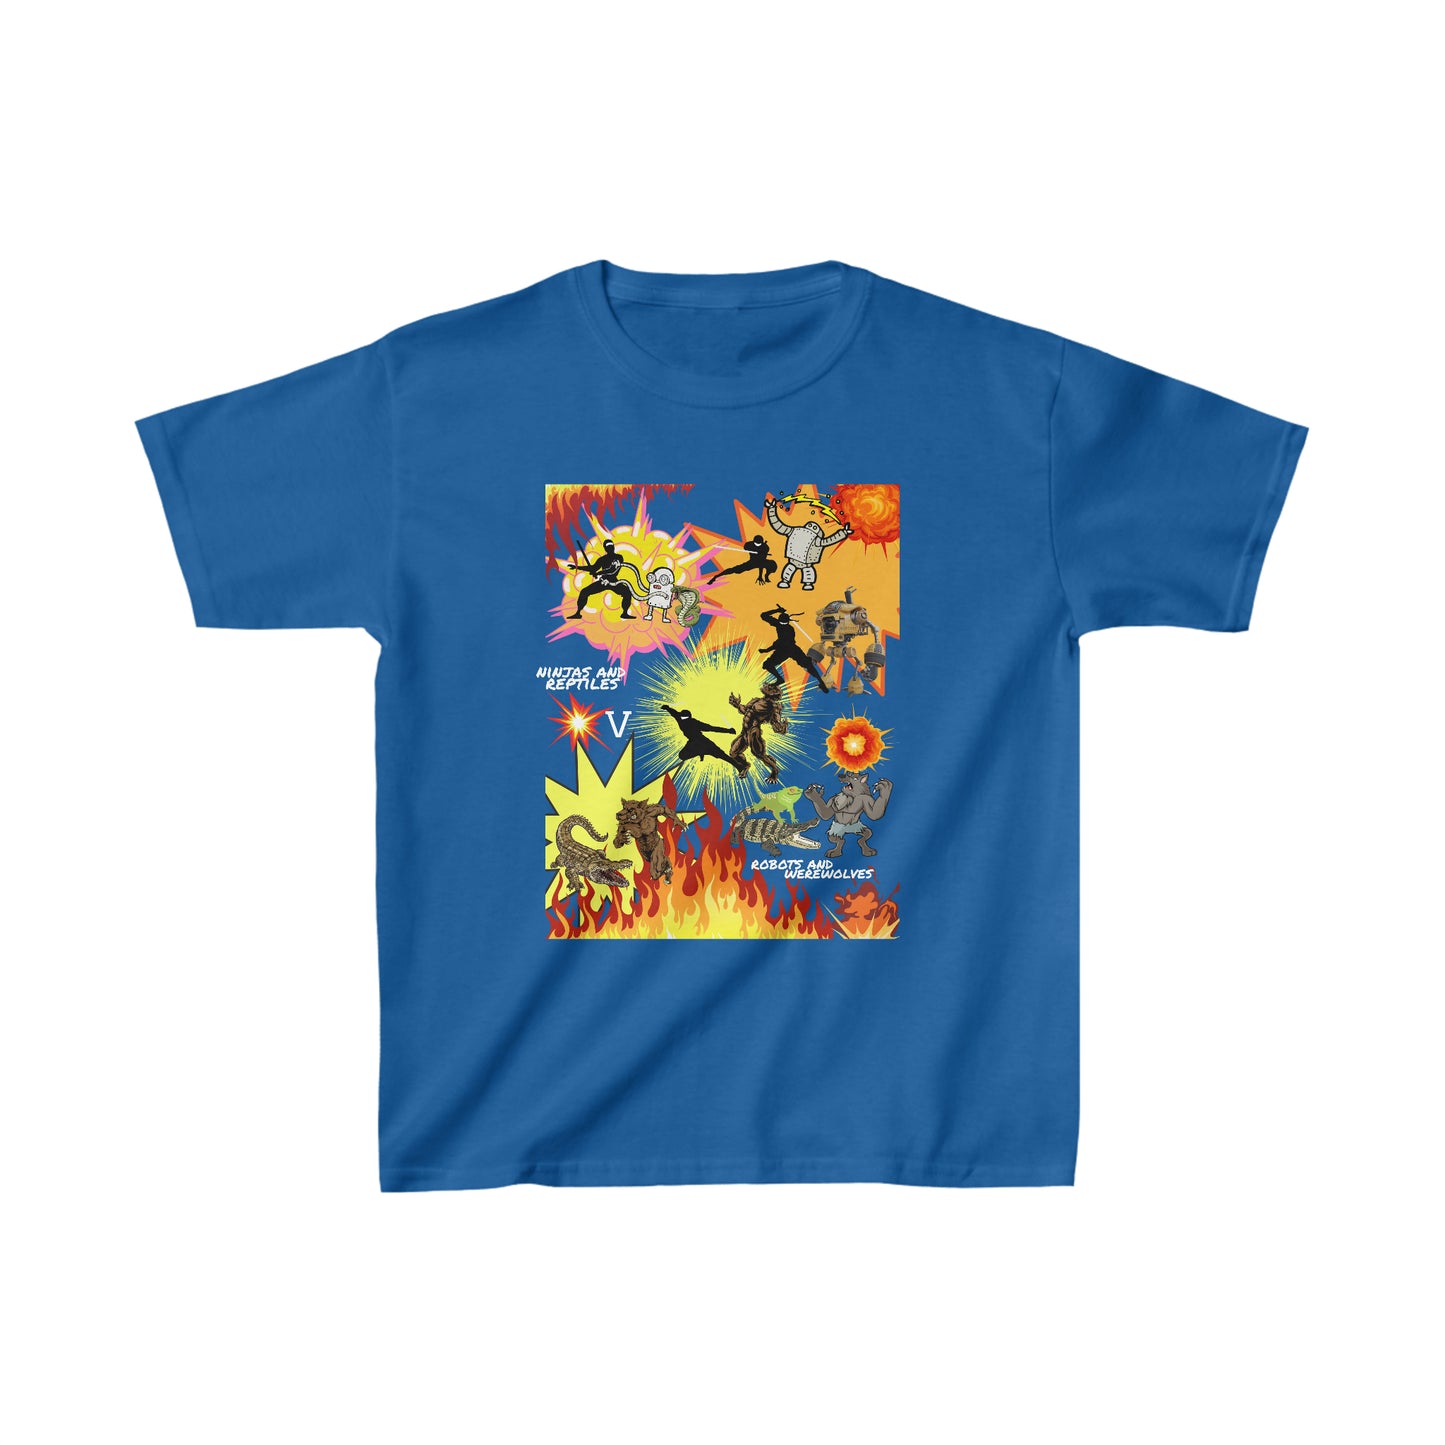 Ninjas and Reptiles V Robots and Werewolves (Kids Heavy Cotton Tee)